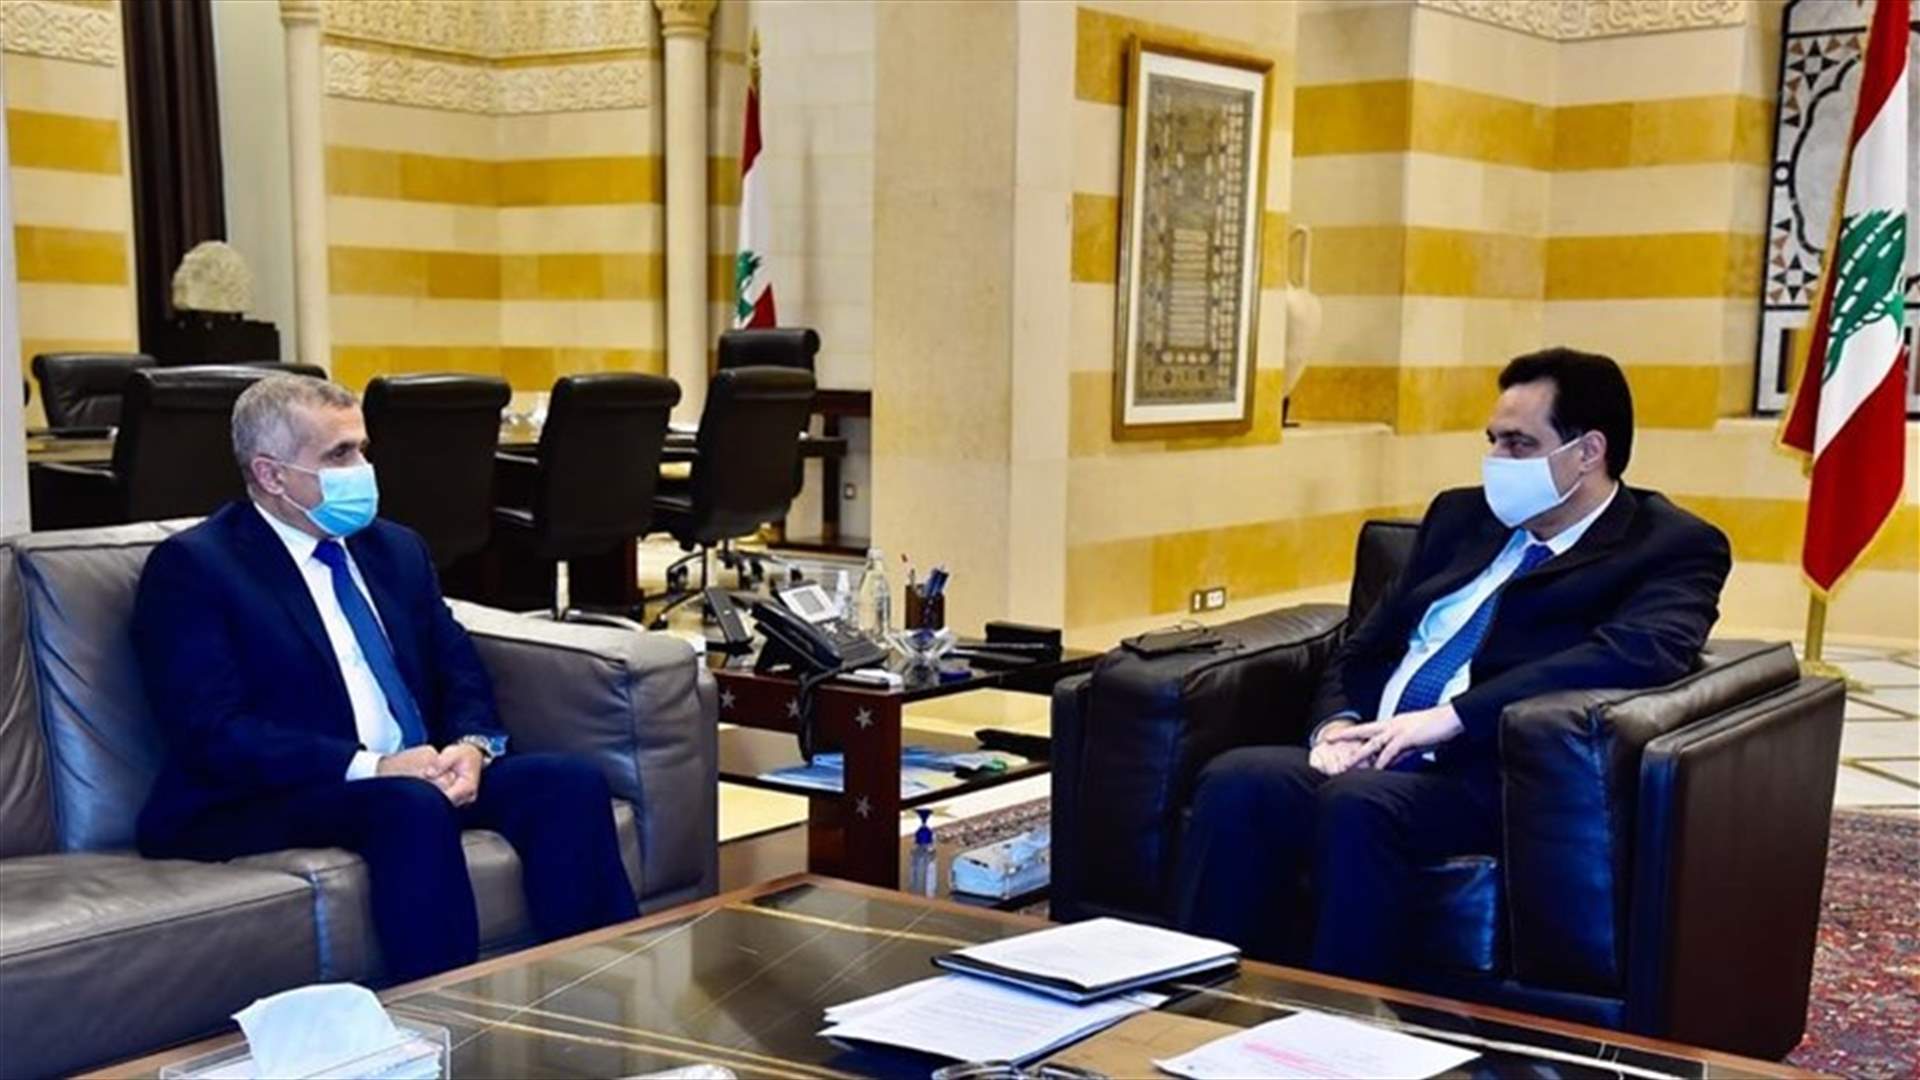 PM Diab meets MP Traboulsi over education, private schools